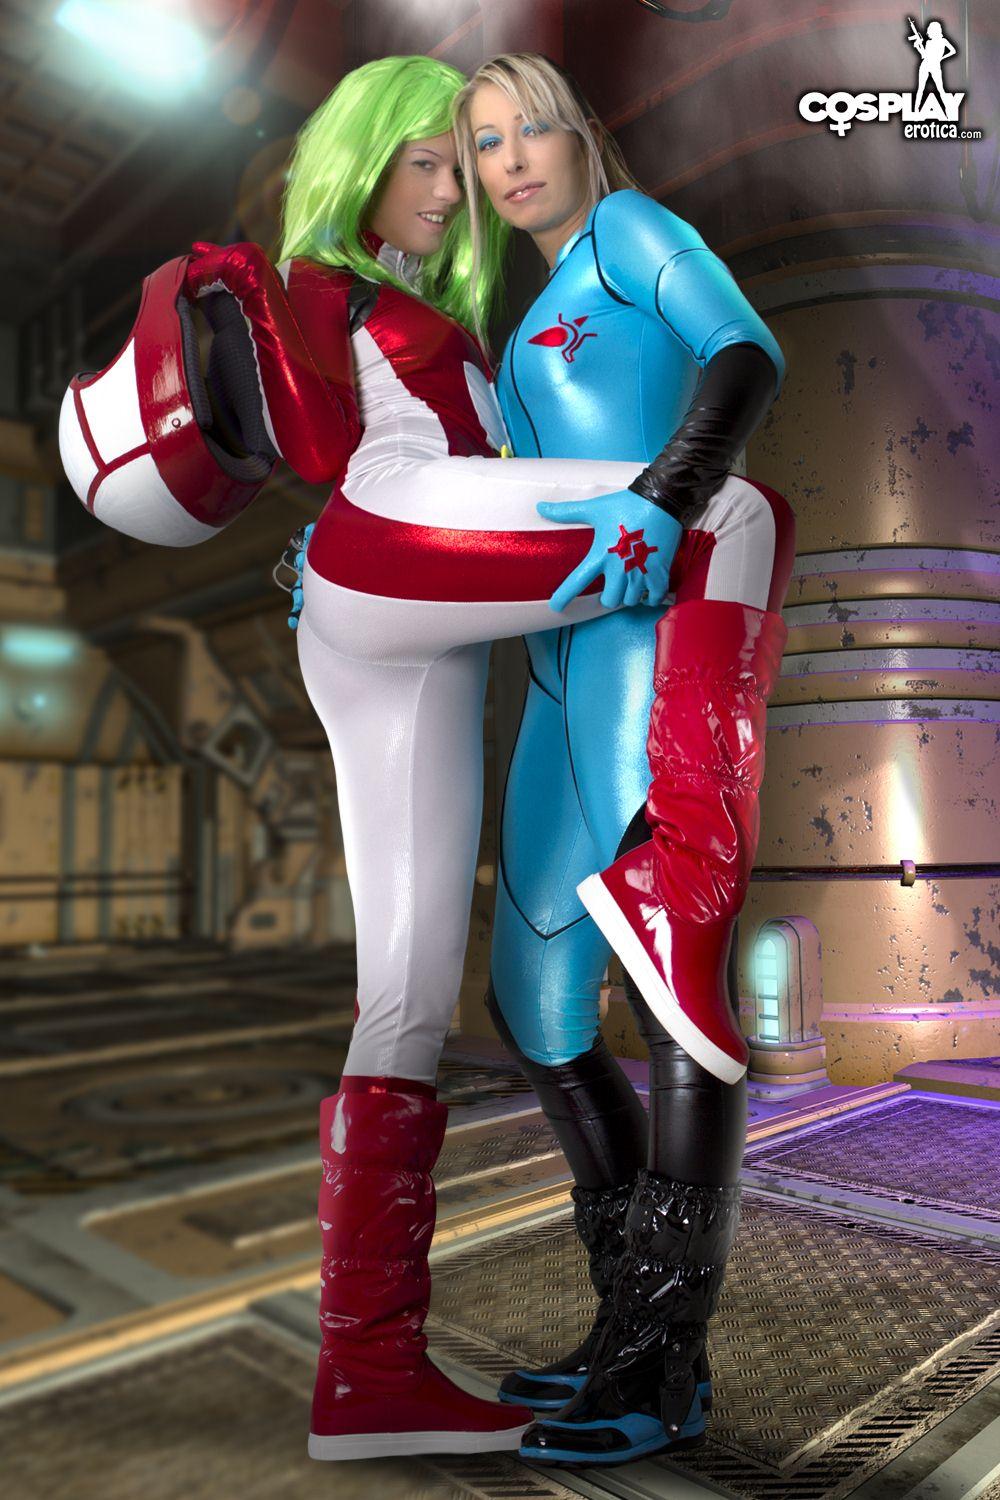 Cosplayers Sandy Bell and Ginger dress up as Metroid characters and get it on #54531079